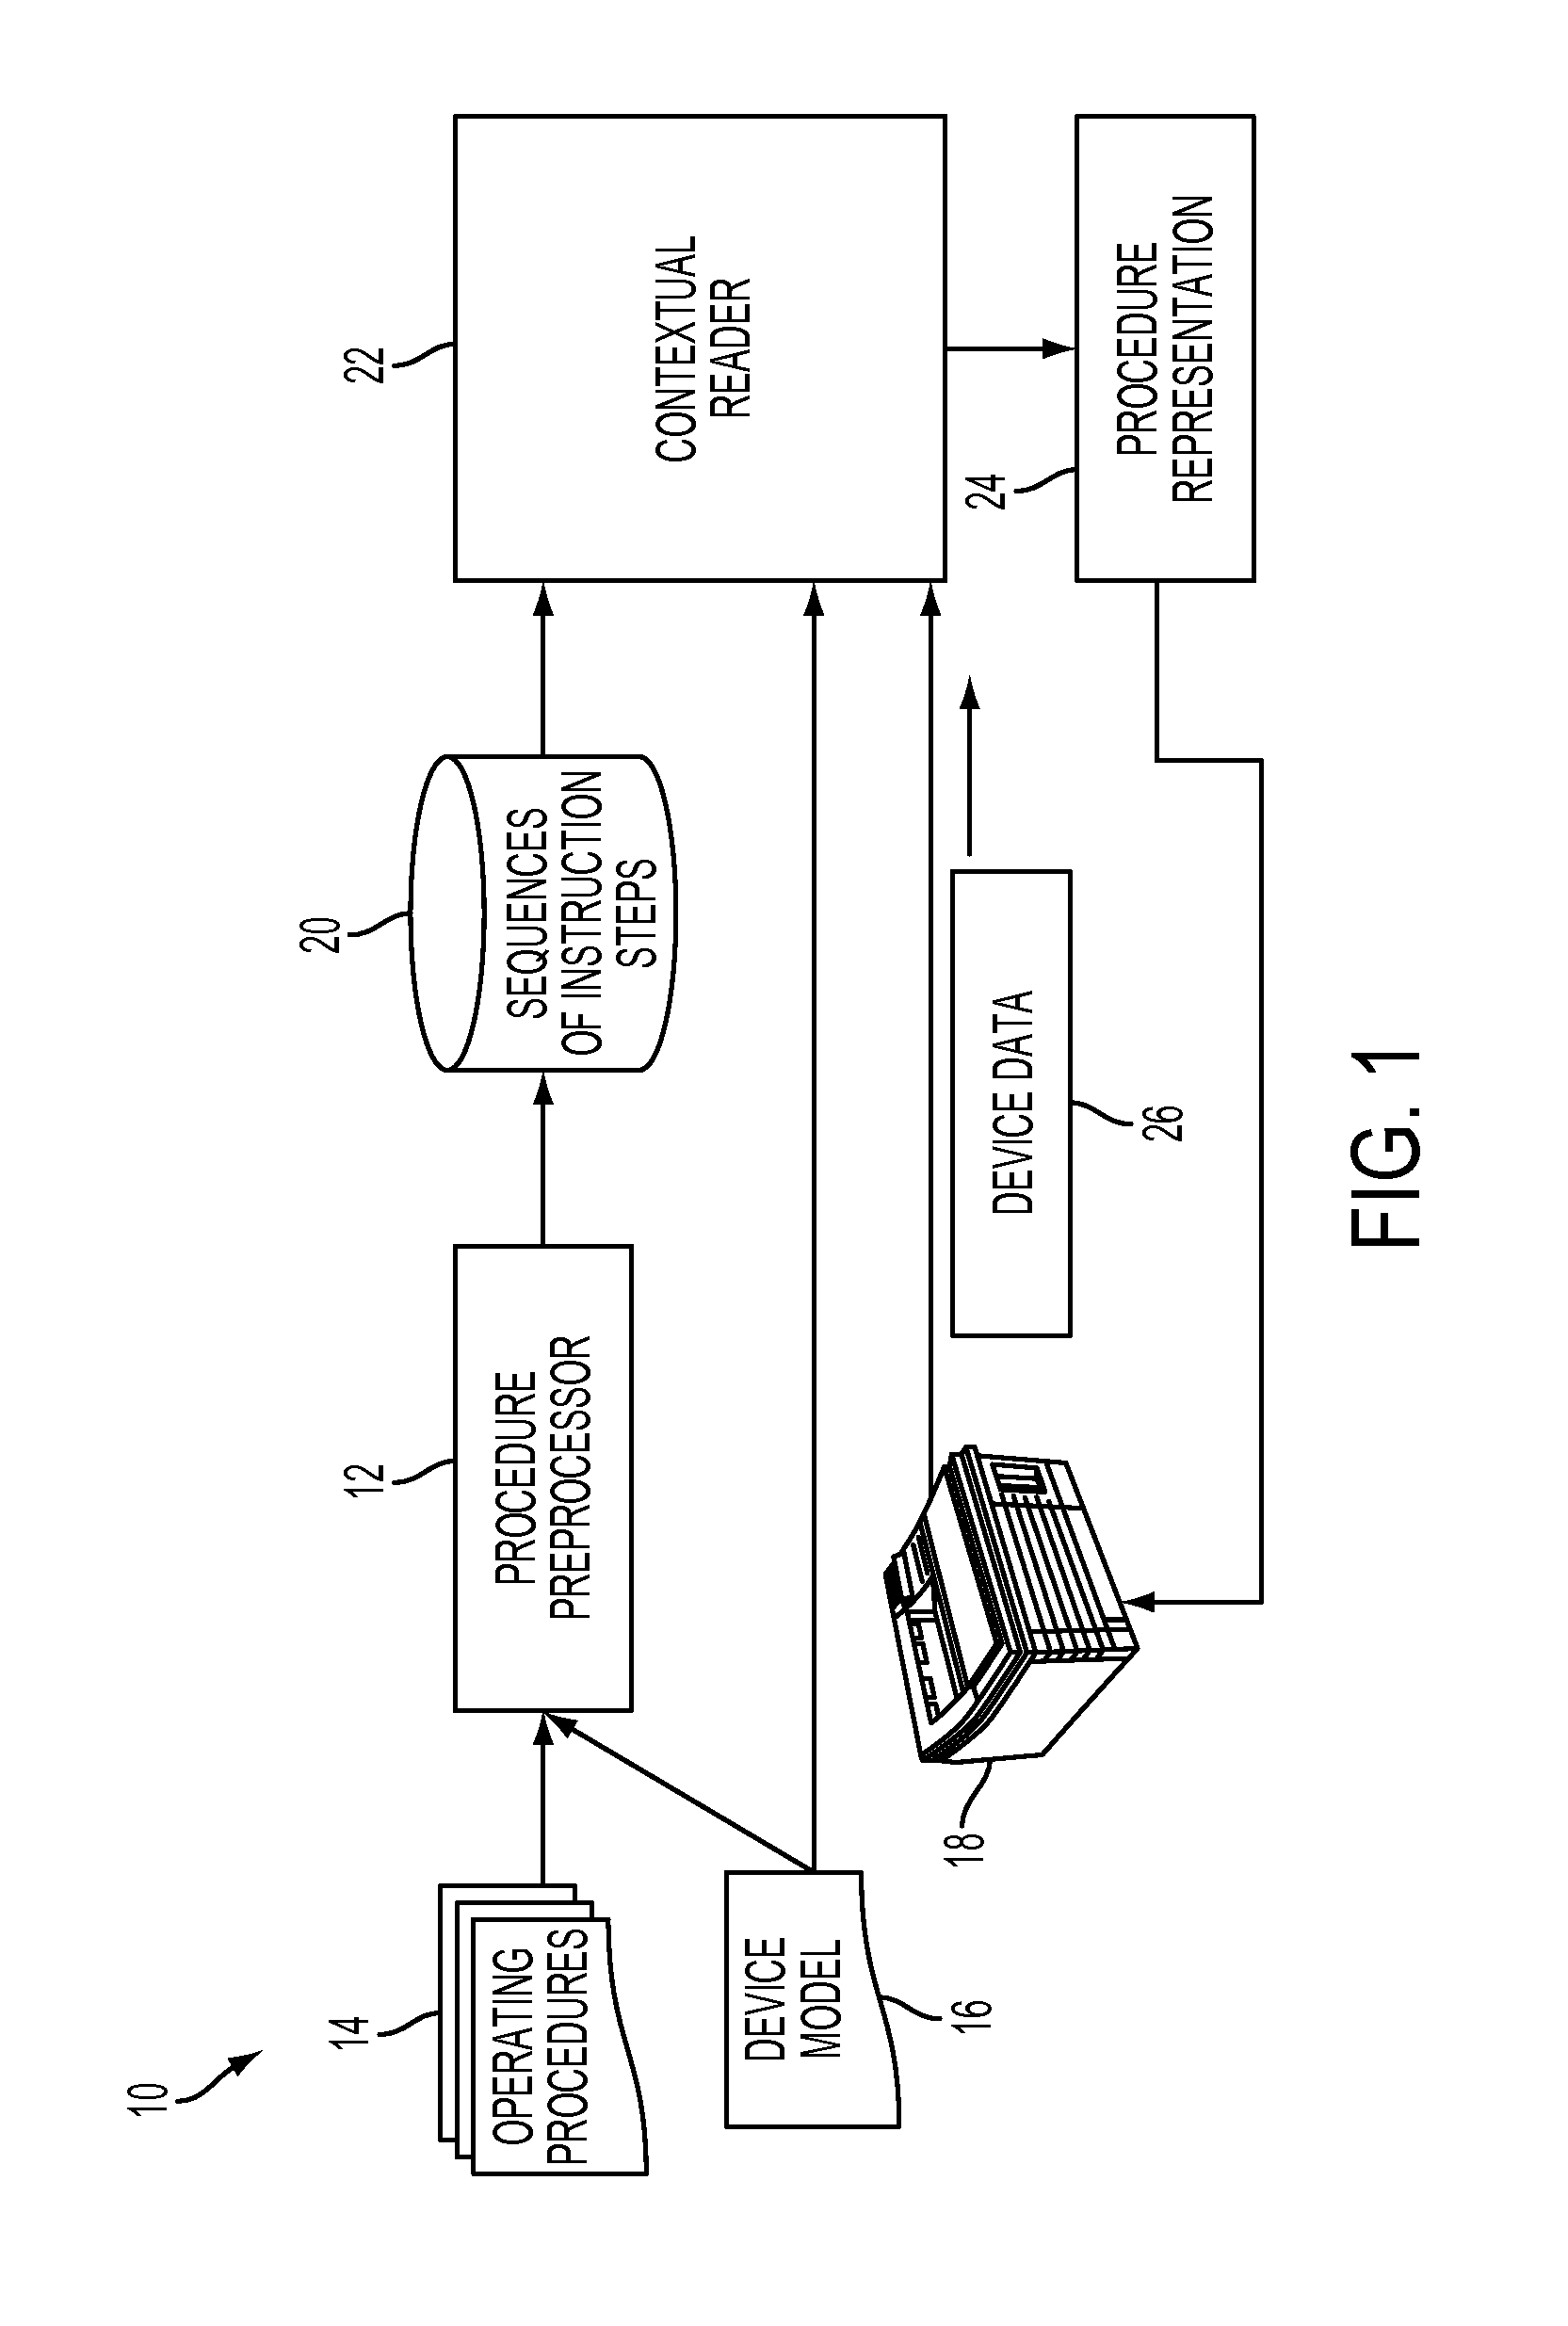 System and method for contextualizing device operating procedures